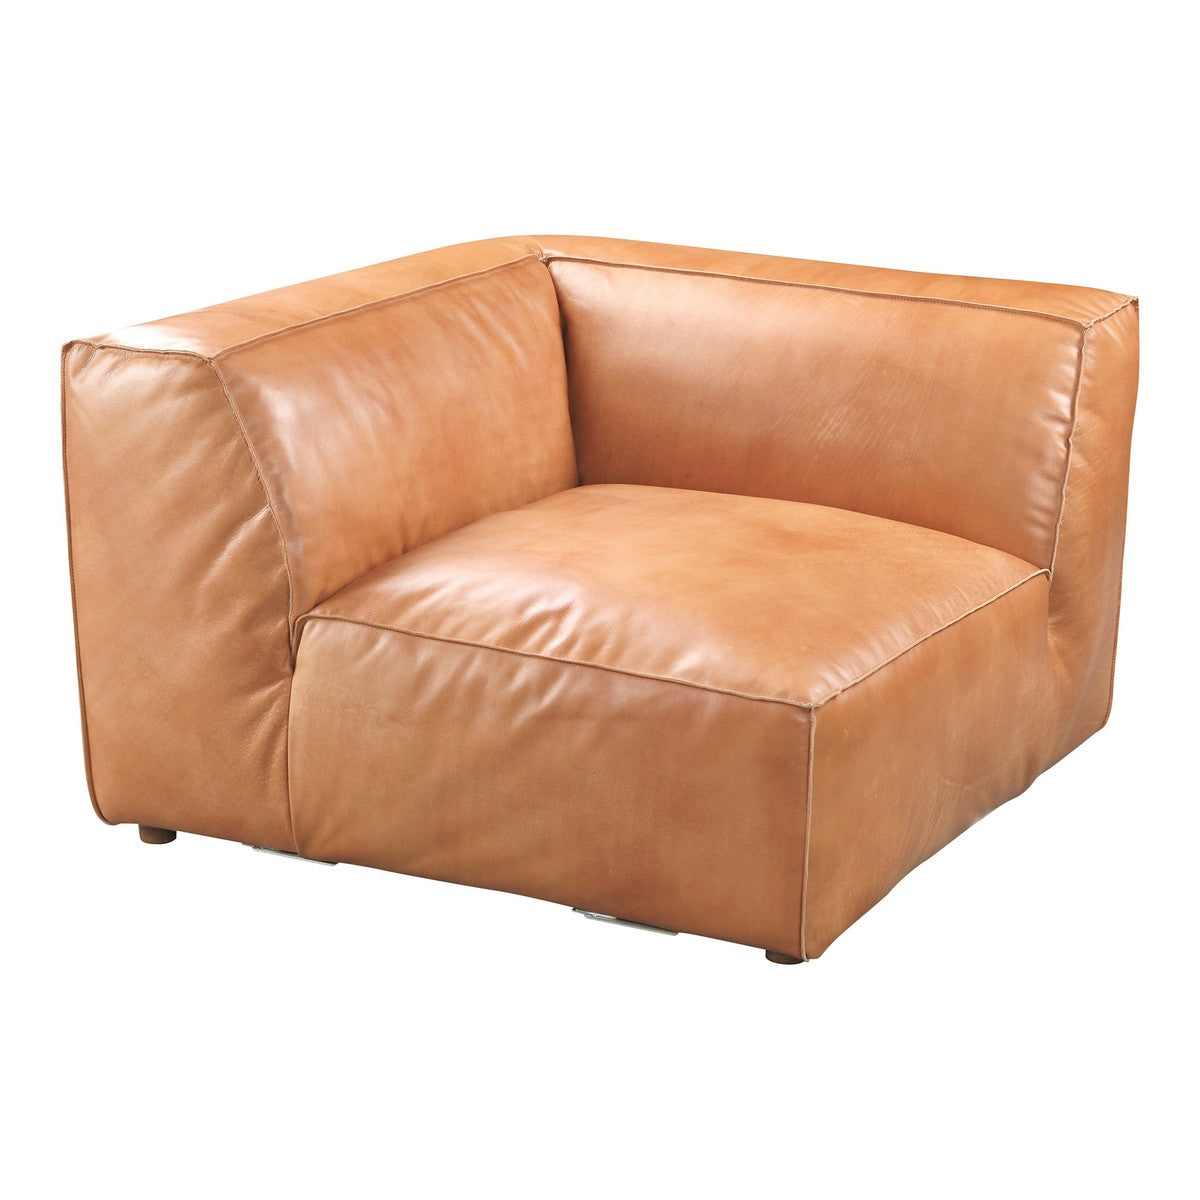 Moe's Home Collection Luxe Corner Chair Tan - QN-1021-40